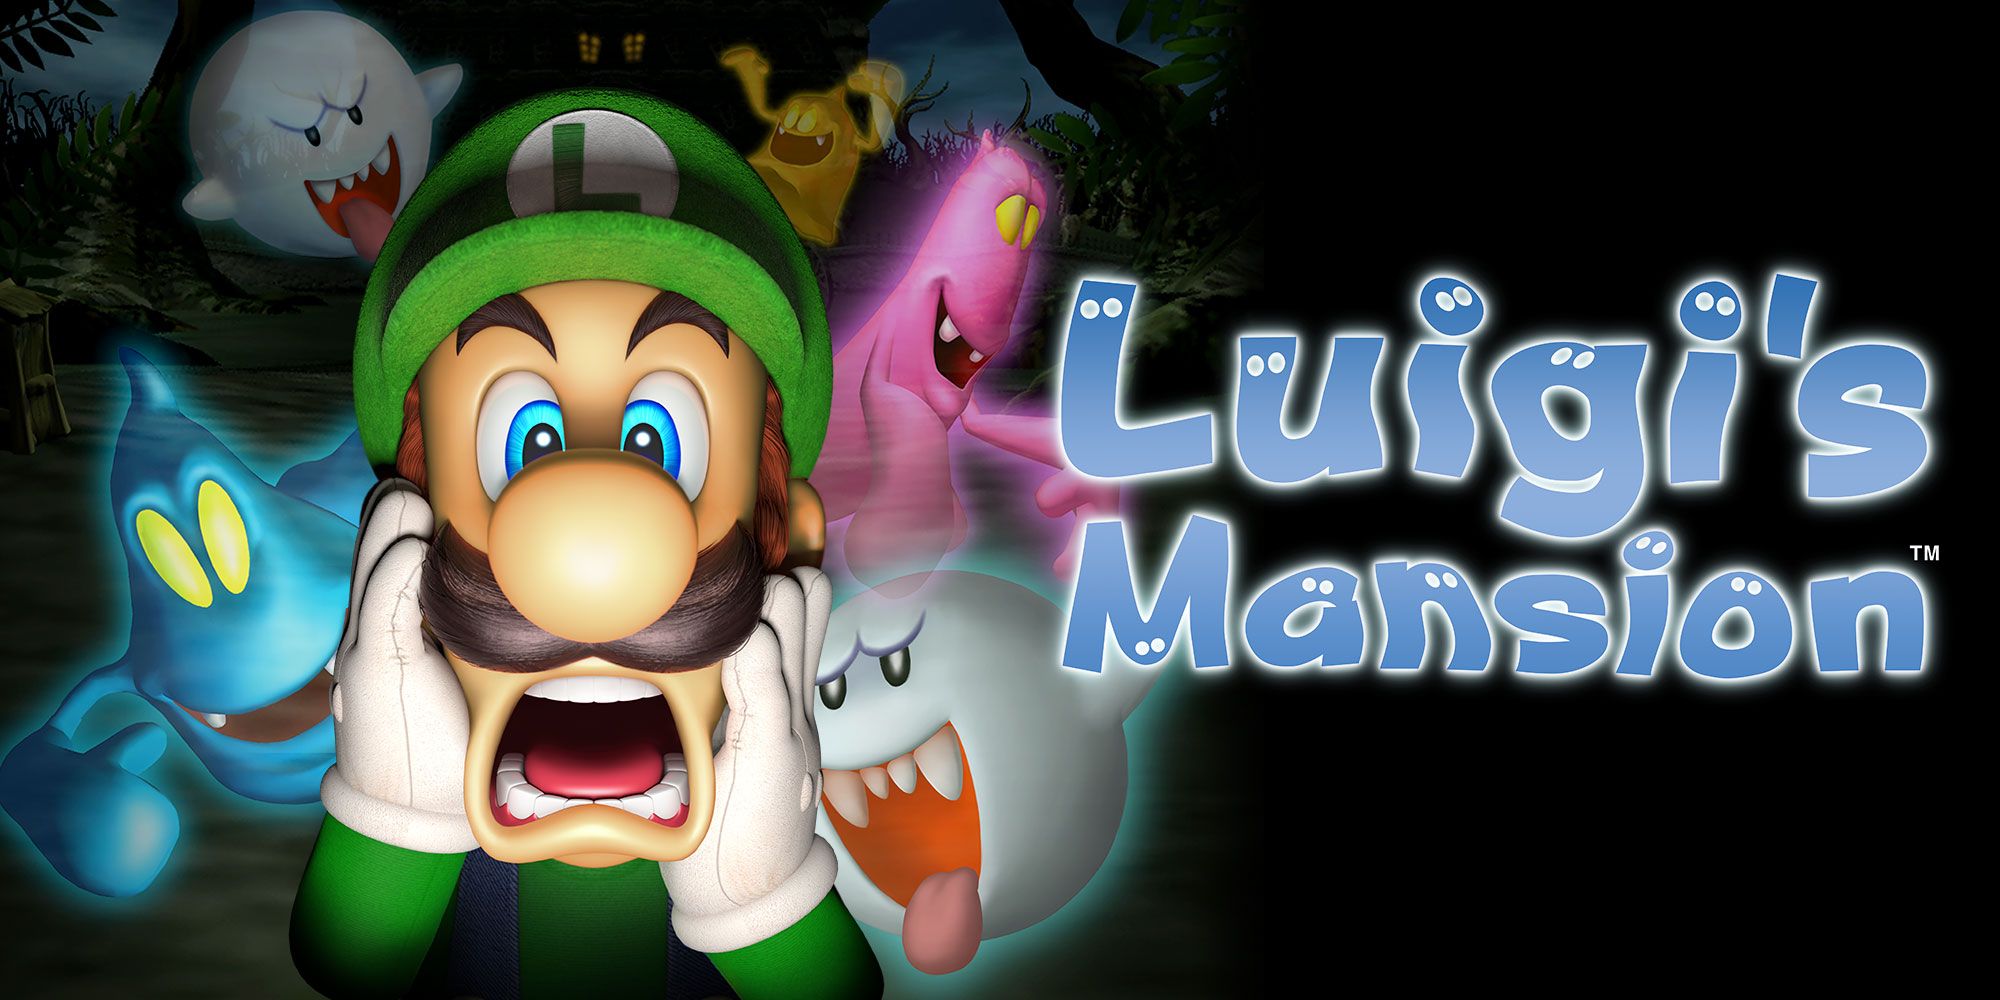 Luigi's Mansion GameCube - Luigi screaming while surrounded by Boos and other ghosts